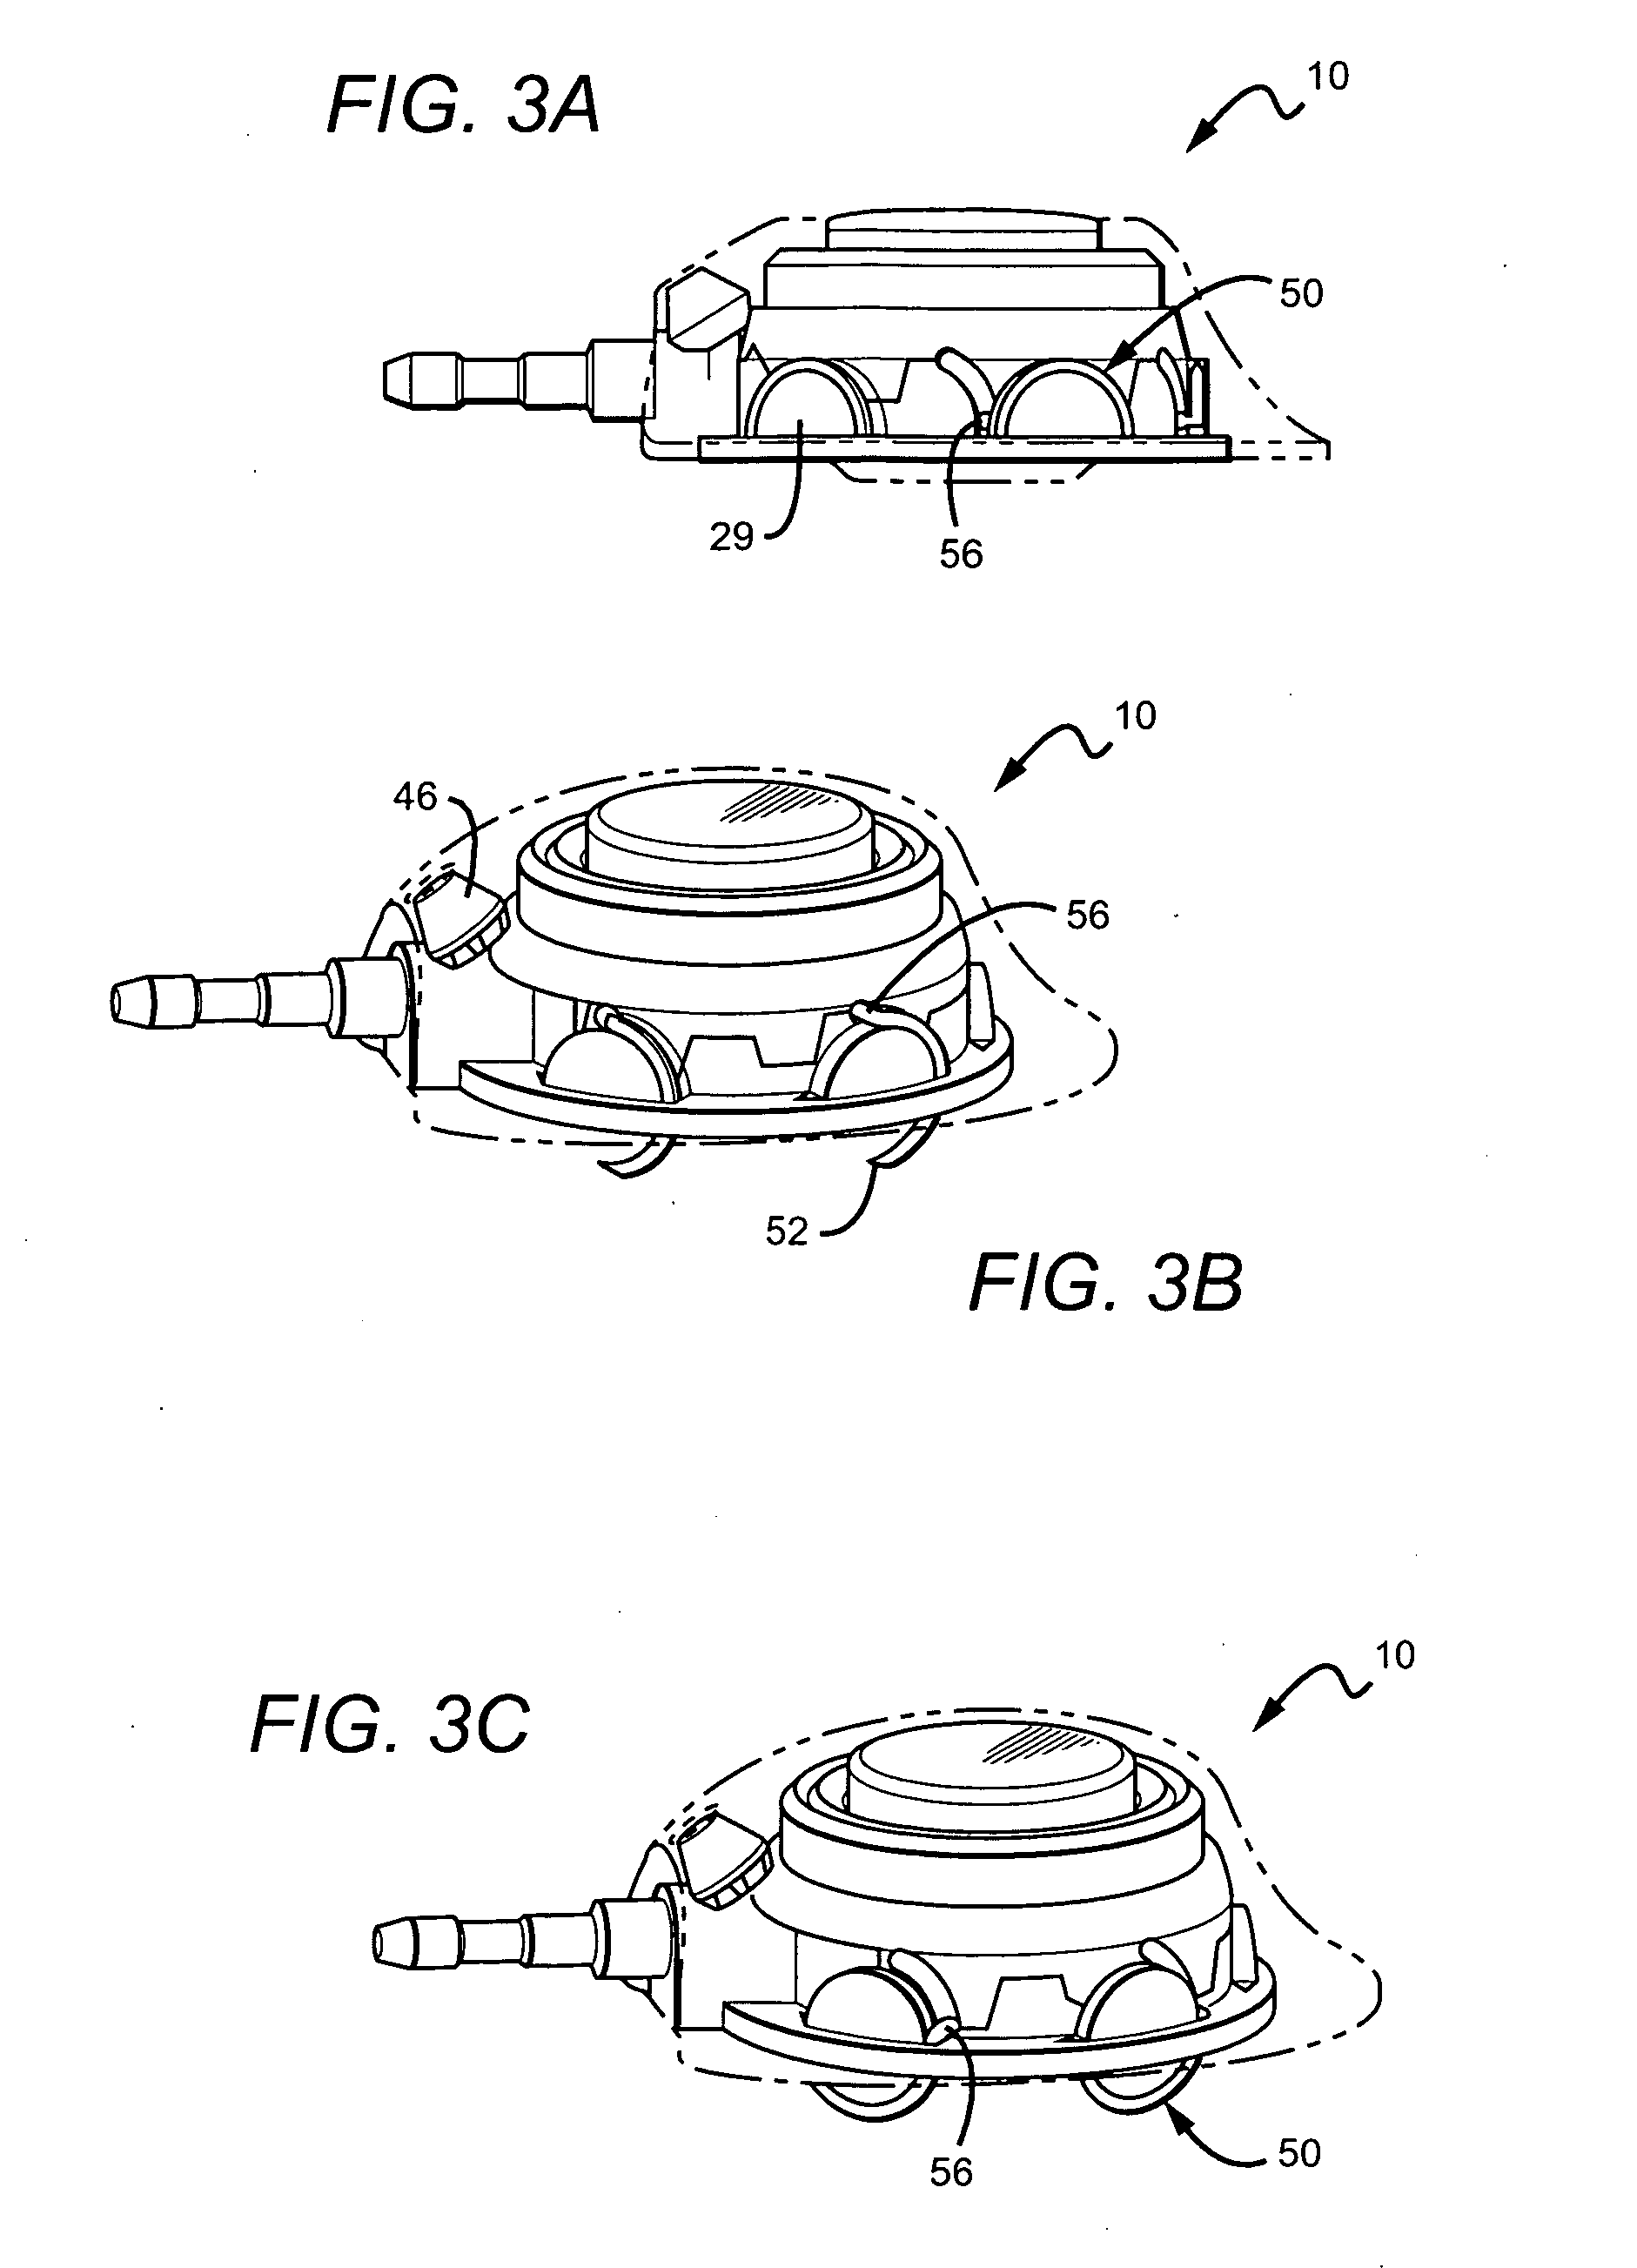 Vascular access port with integral attachment mechanism